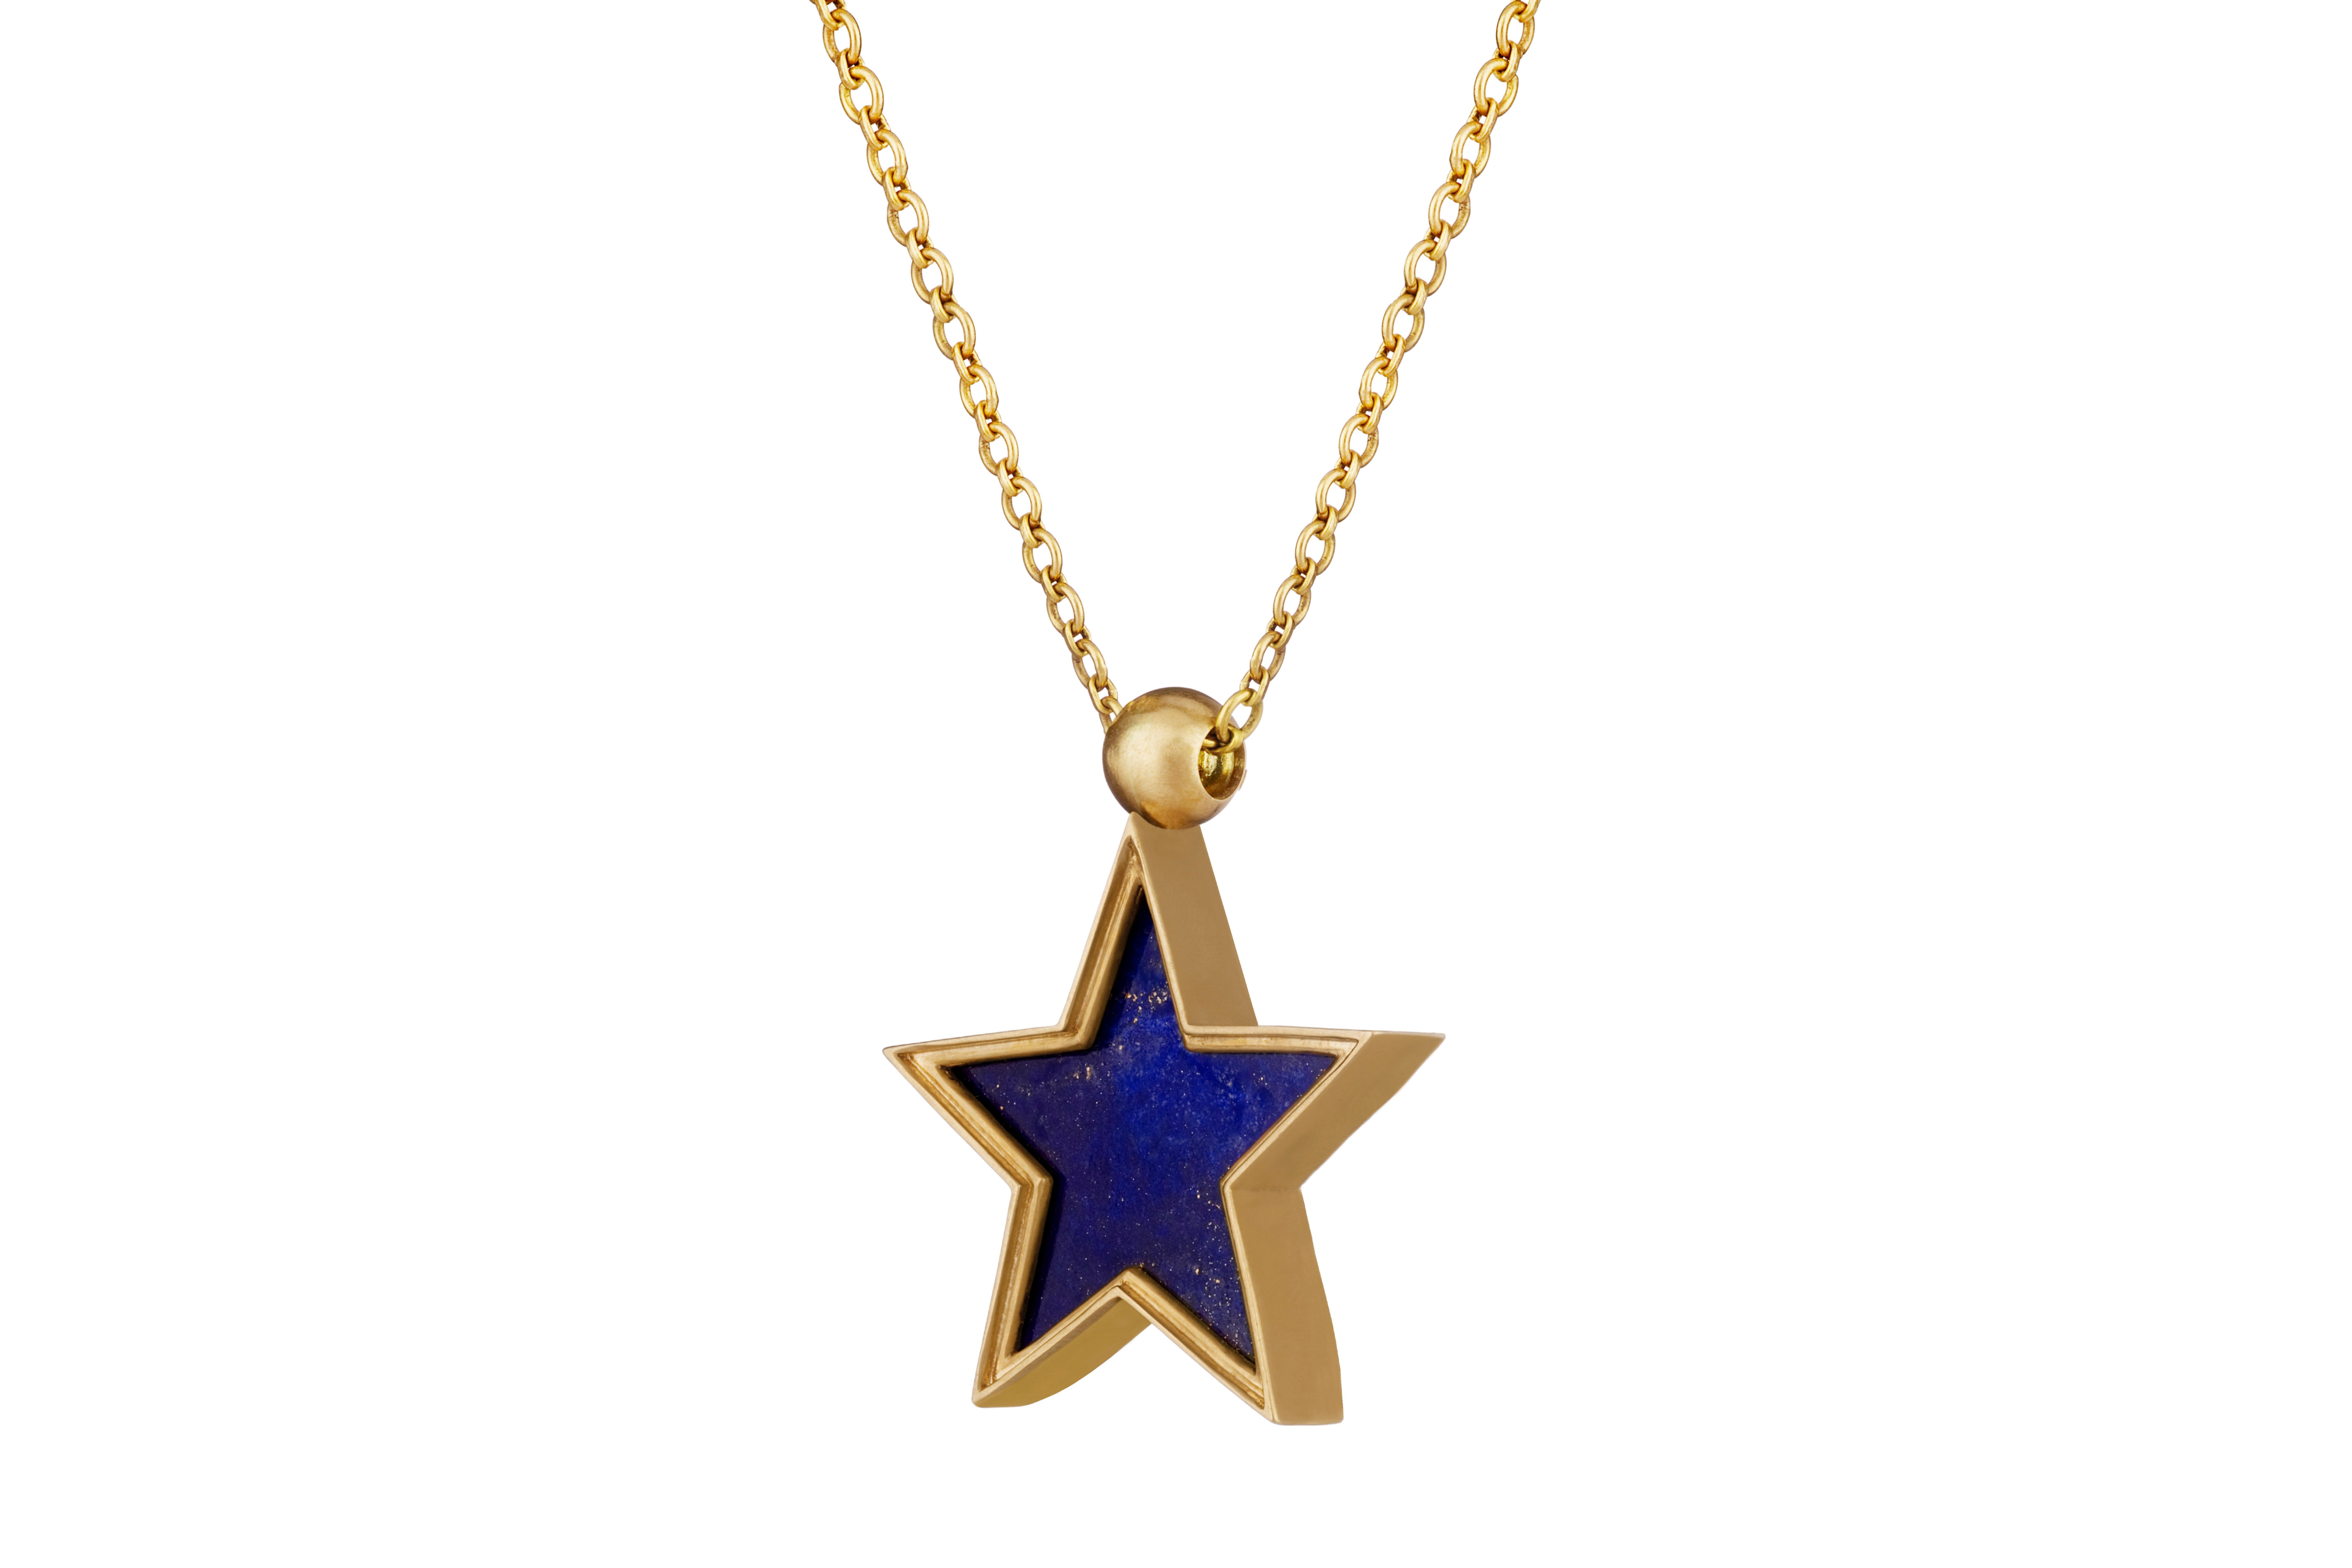 Ouroboros lapis lazuli star swivel pendant set in 18 and 24 karat gold on a handmade 18 karat gold chain. There is a black rhodium plated silver chain option.   

This is part of the 'Lapis As You Like It Collection' which represents the cycle of